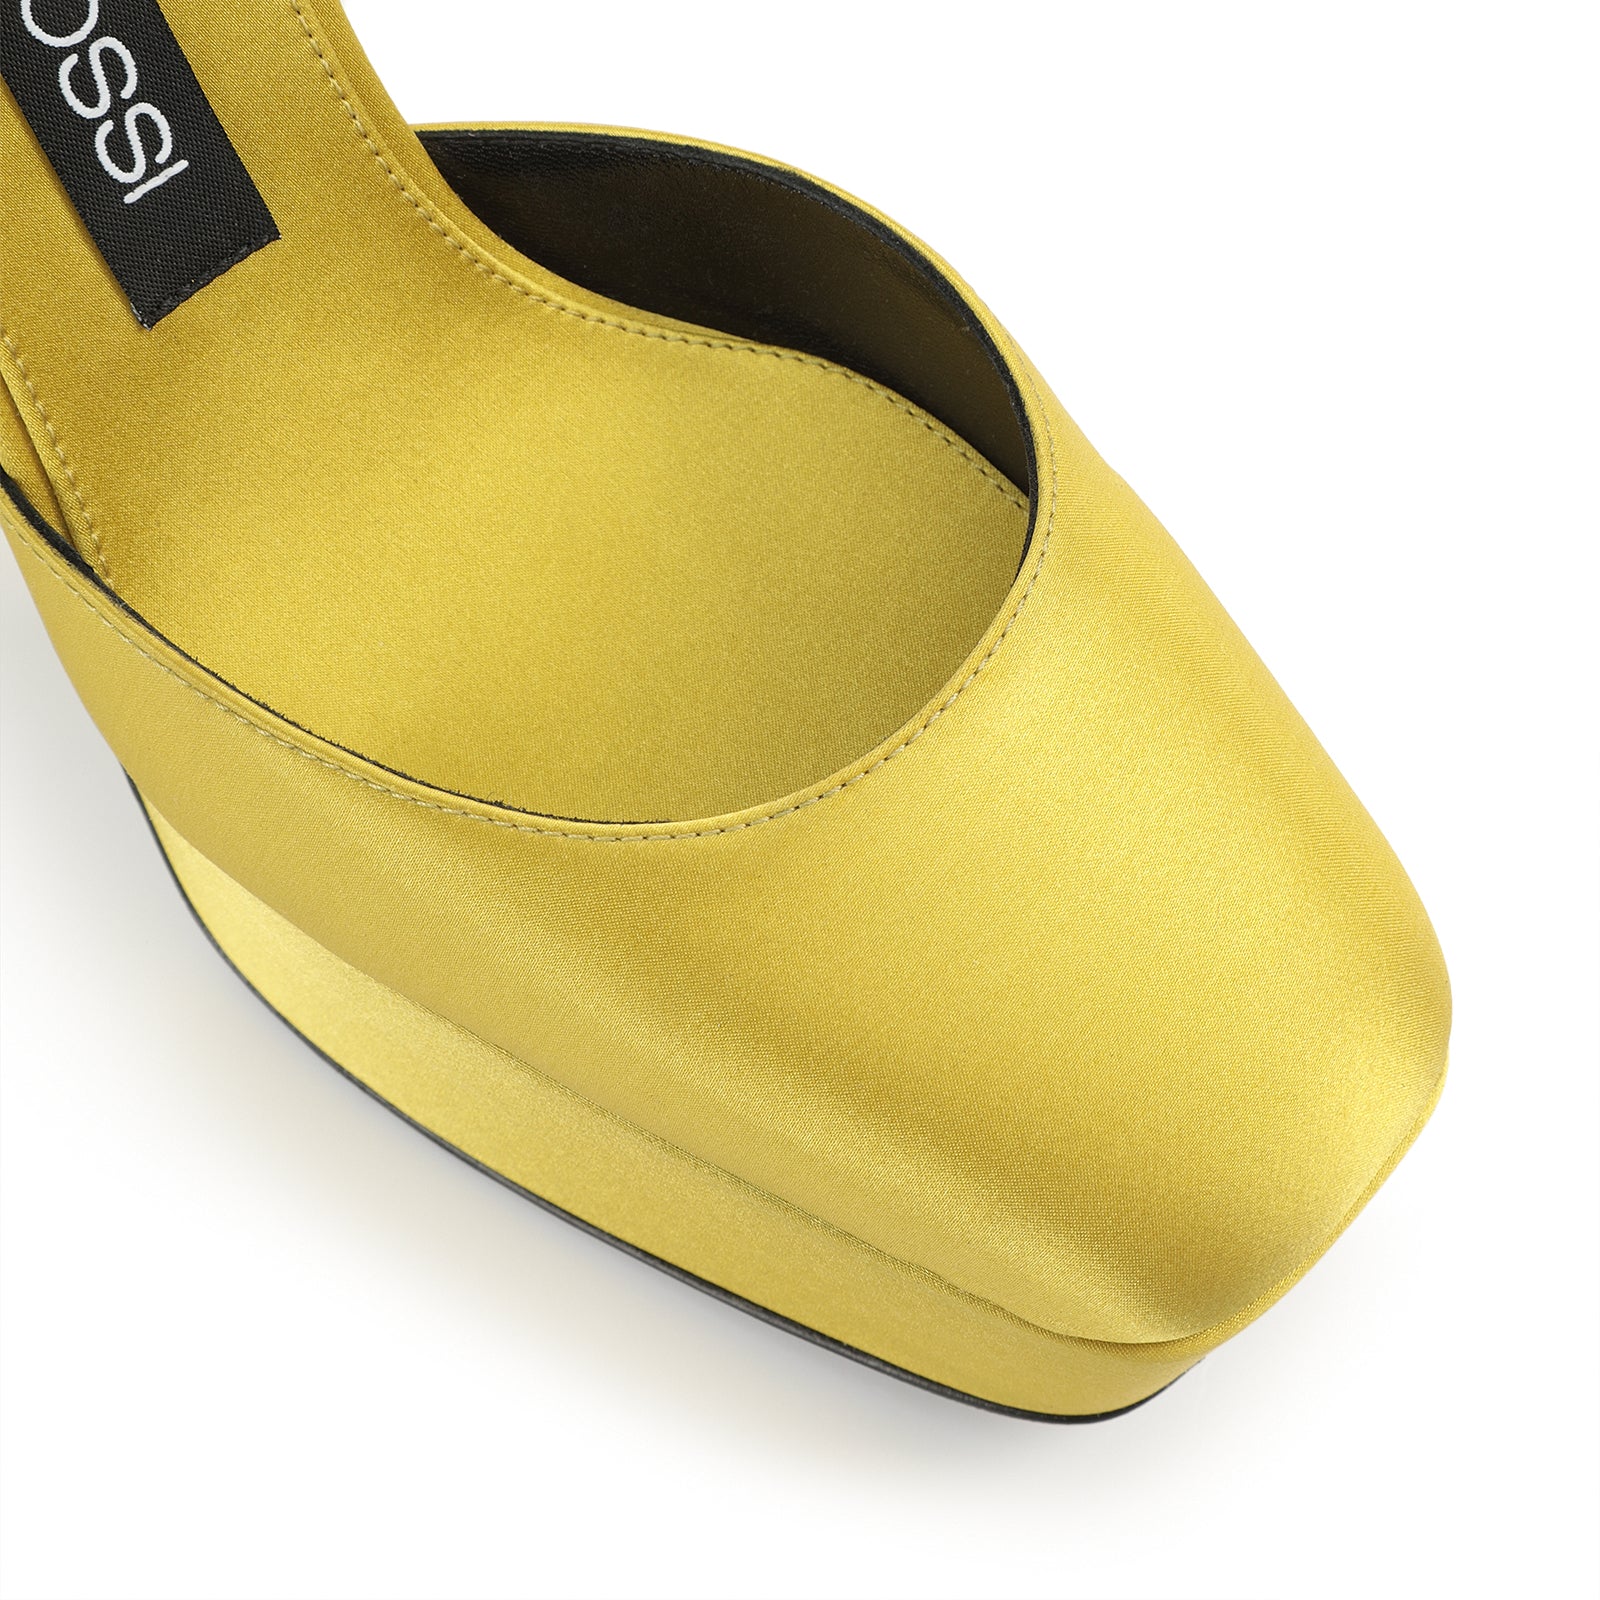 Sr Alicia wedge sandals 85 - Chartreuse